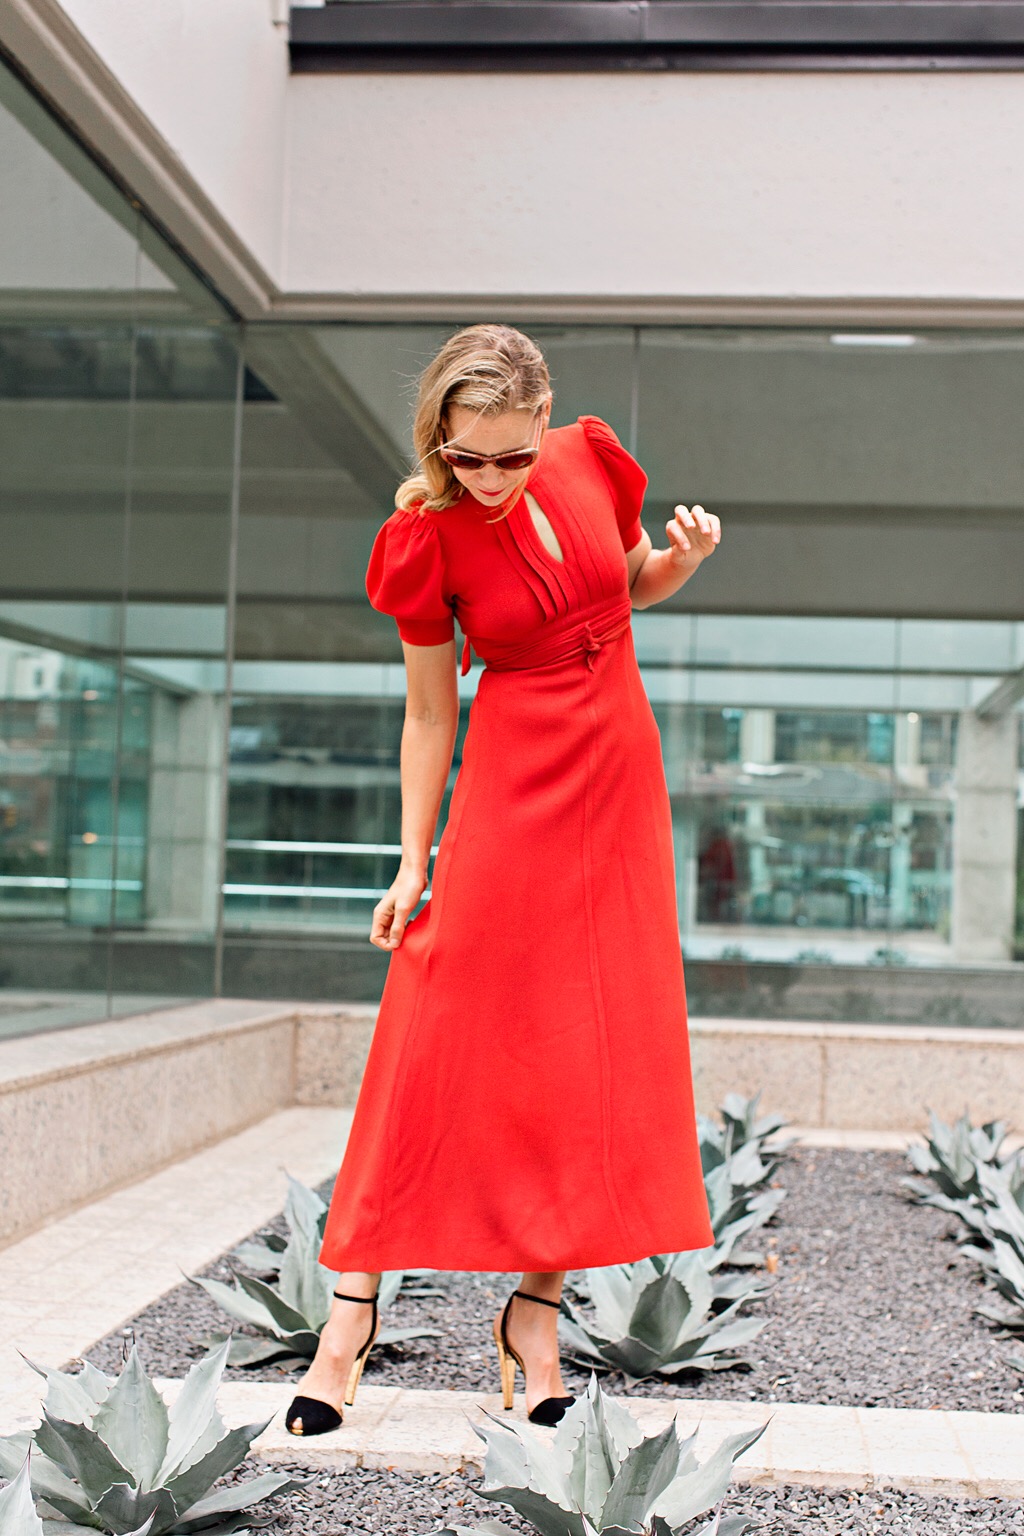 A woman in a red dress and black velvet heels